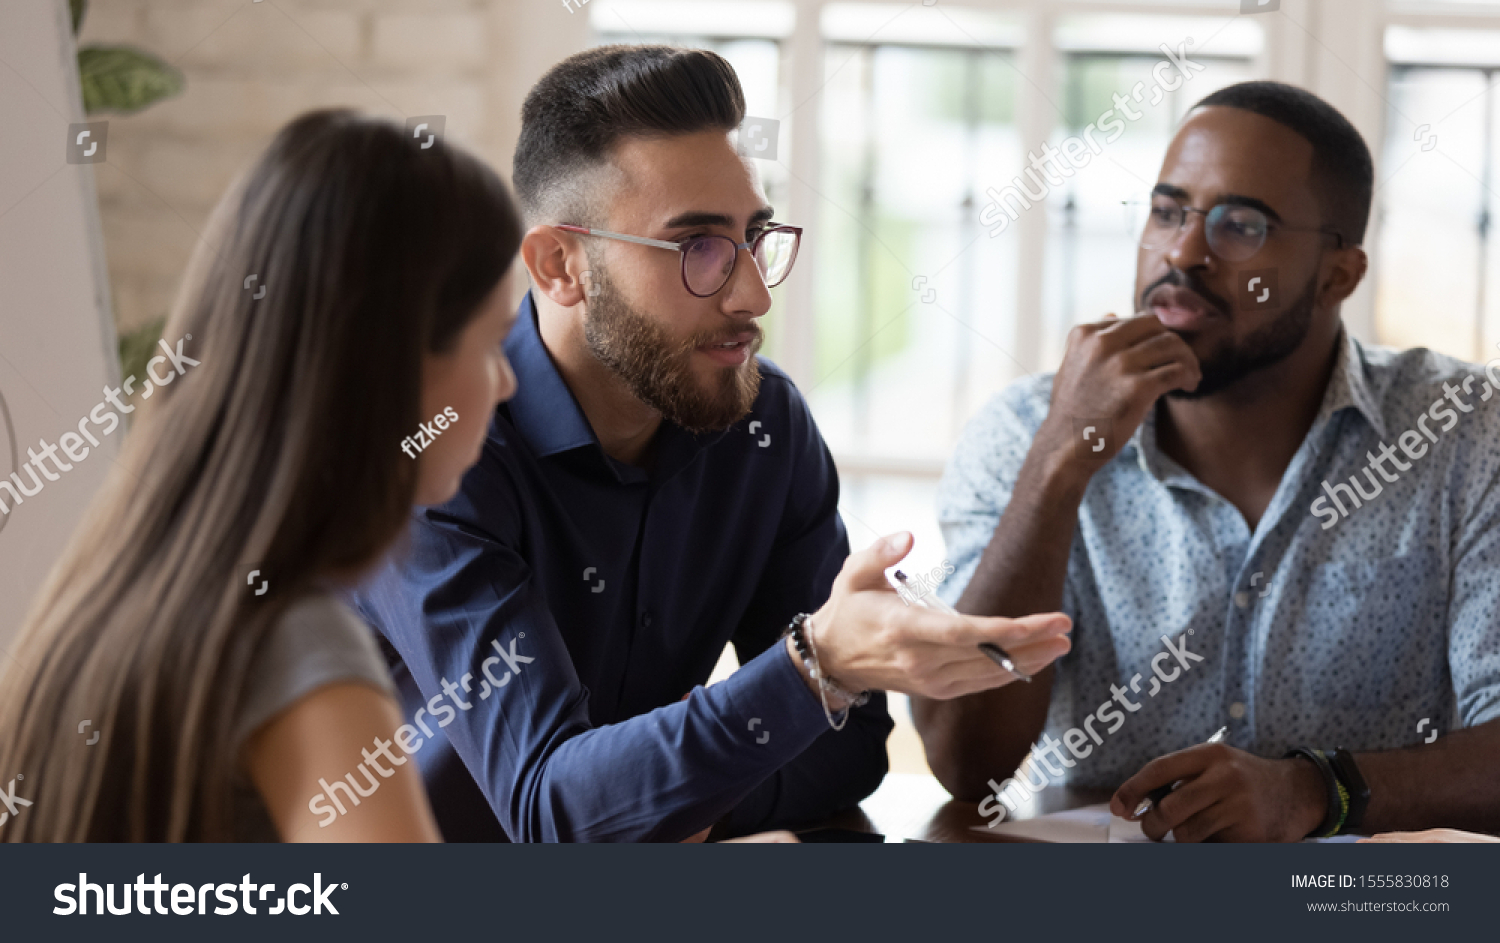 In board room gathered multi racial business people focus on serious middle eastern ethnicity team leader talking about strategy, corporate goals, share ideas, solve problems together at group meeting #1555830818